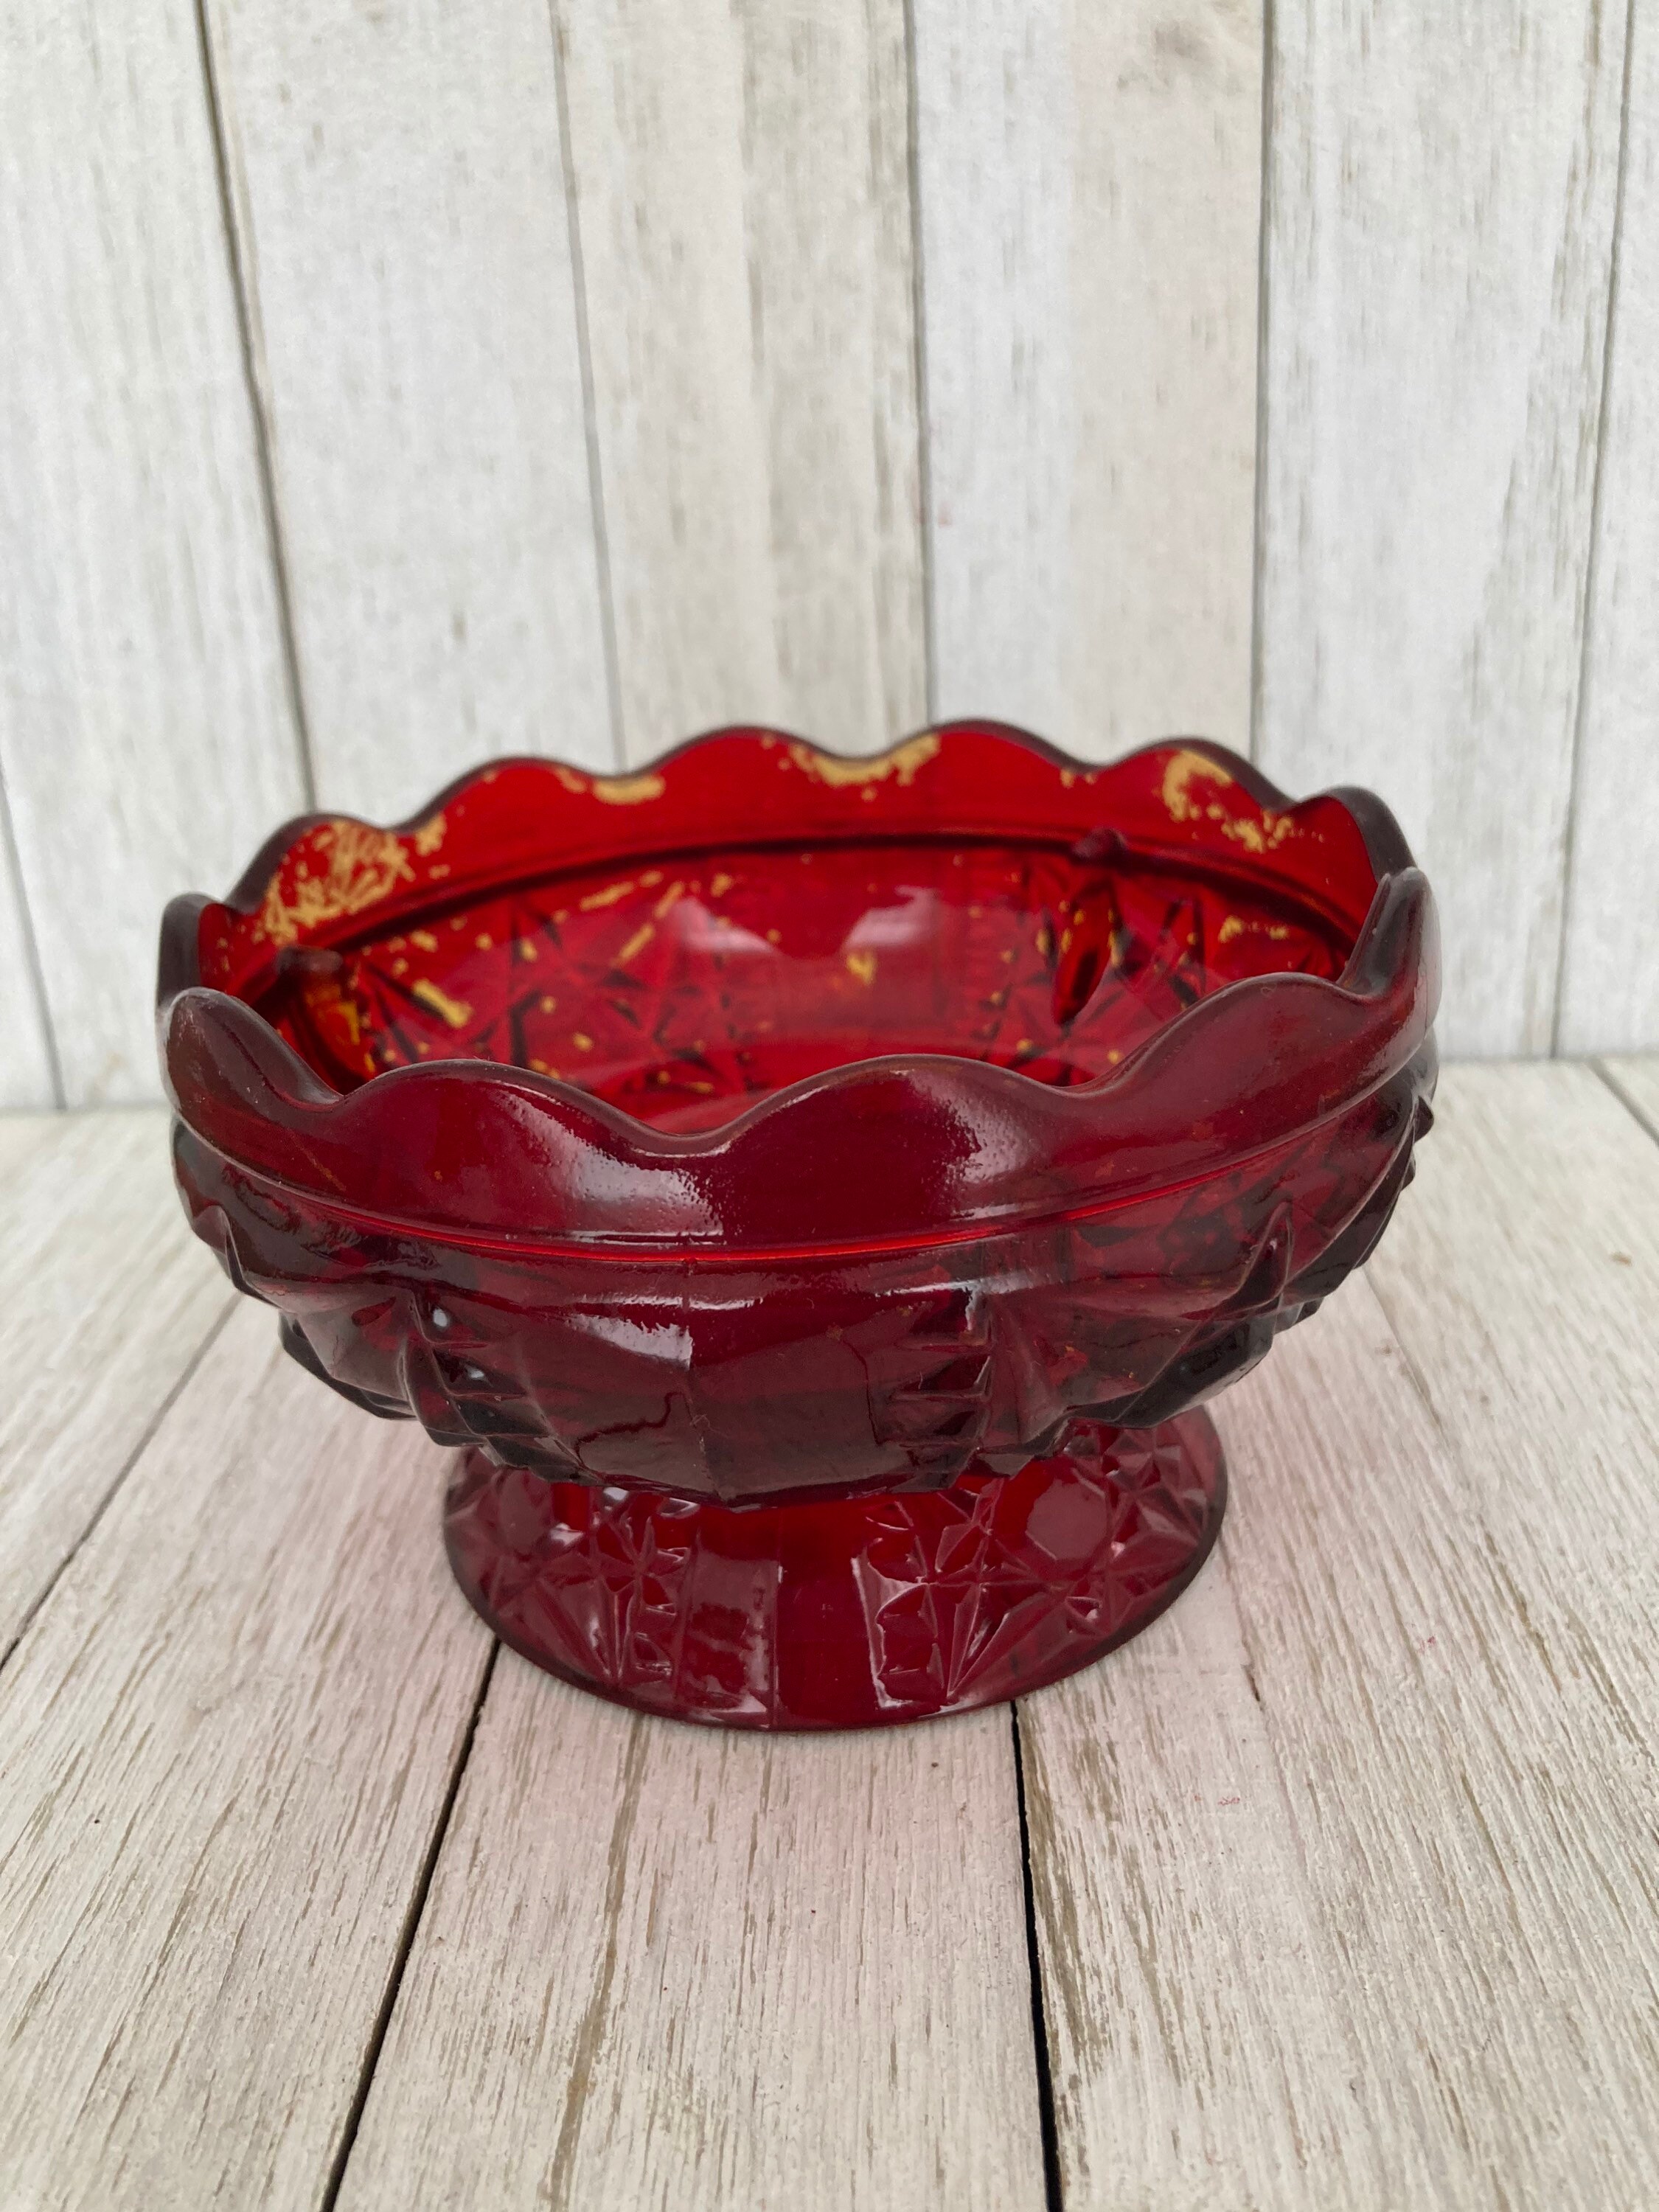 Beautiful Collectible Vintage Ruby Red Glass Serving Bowl - Made in France  - Estate Item